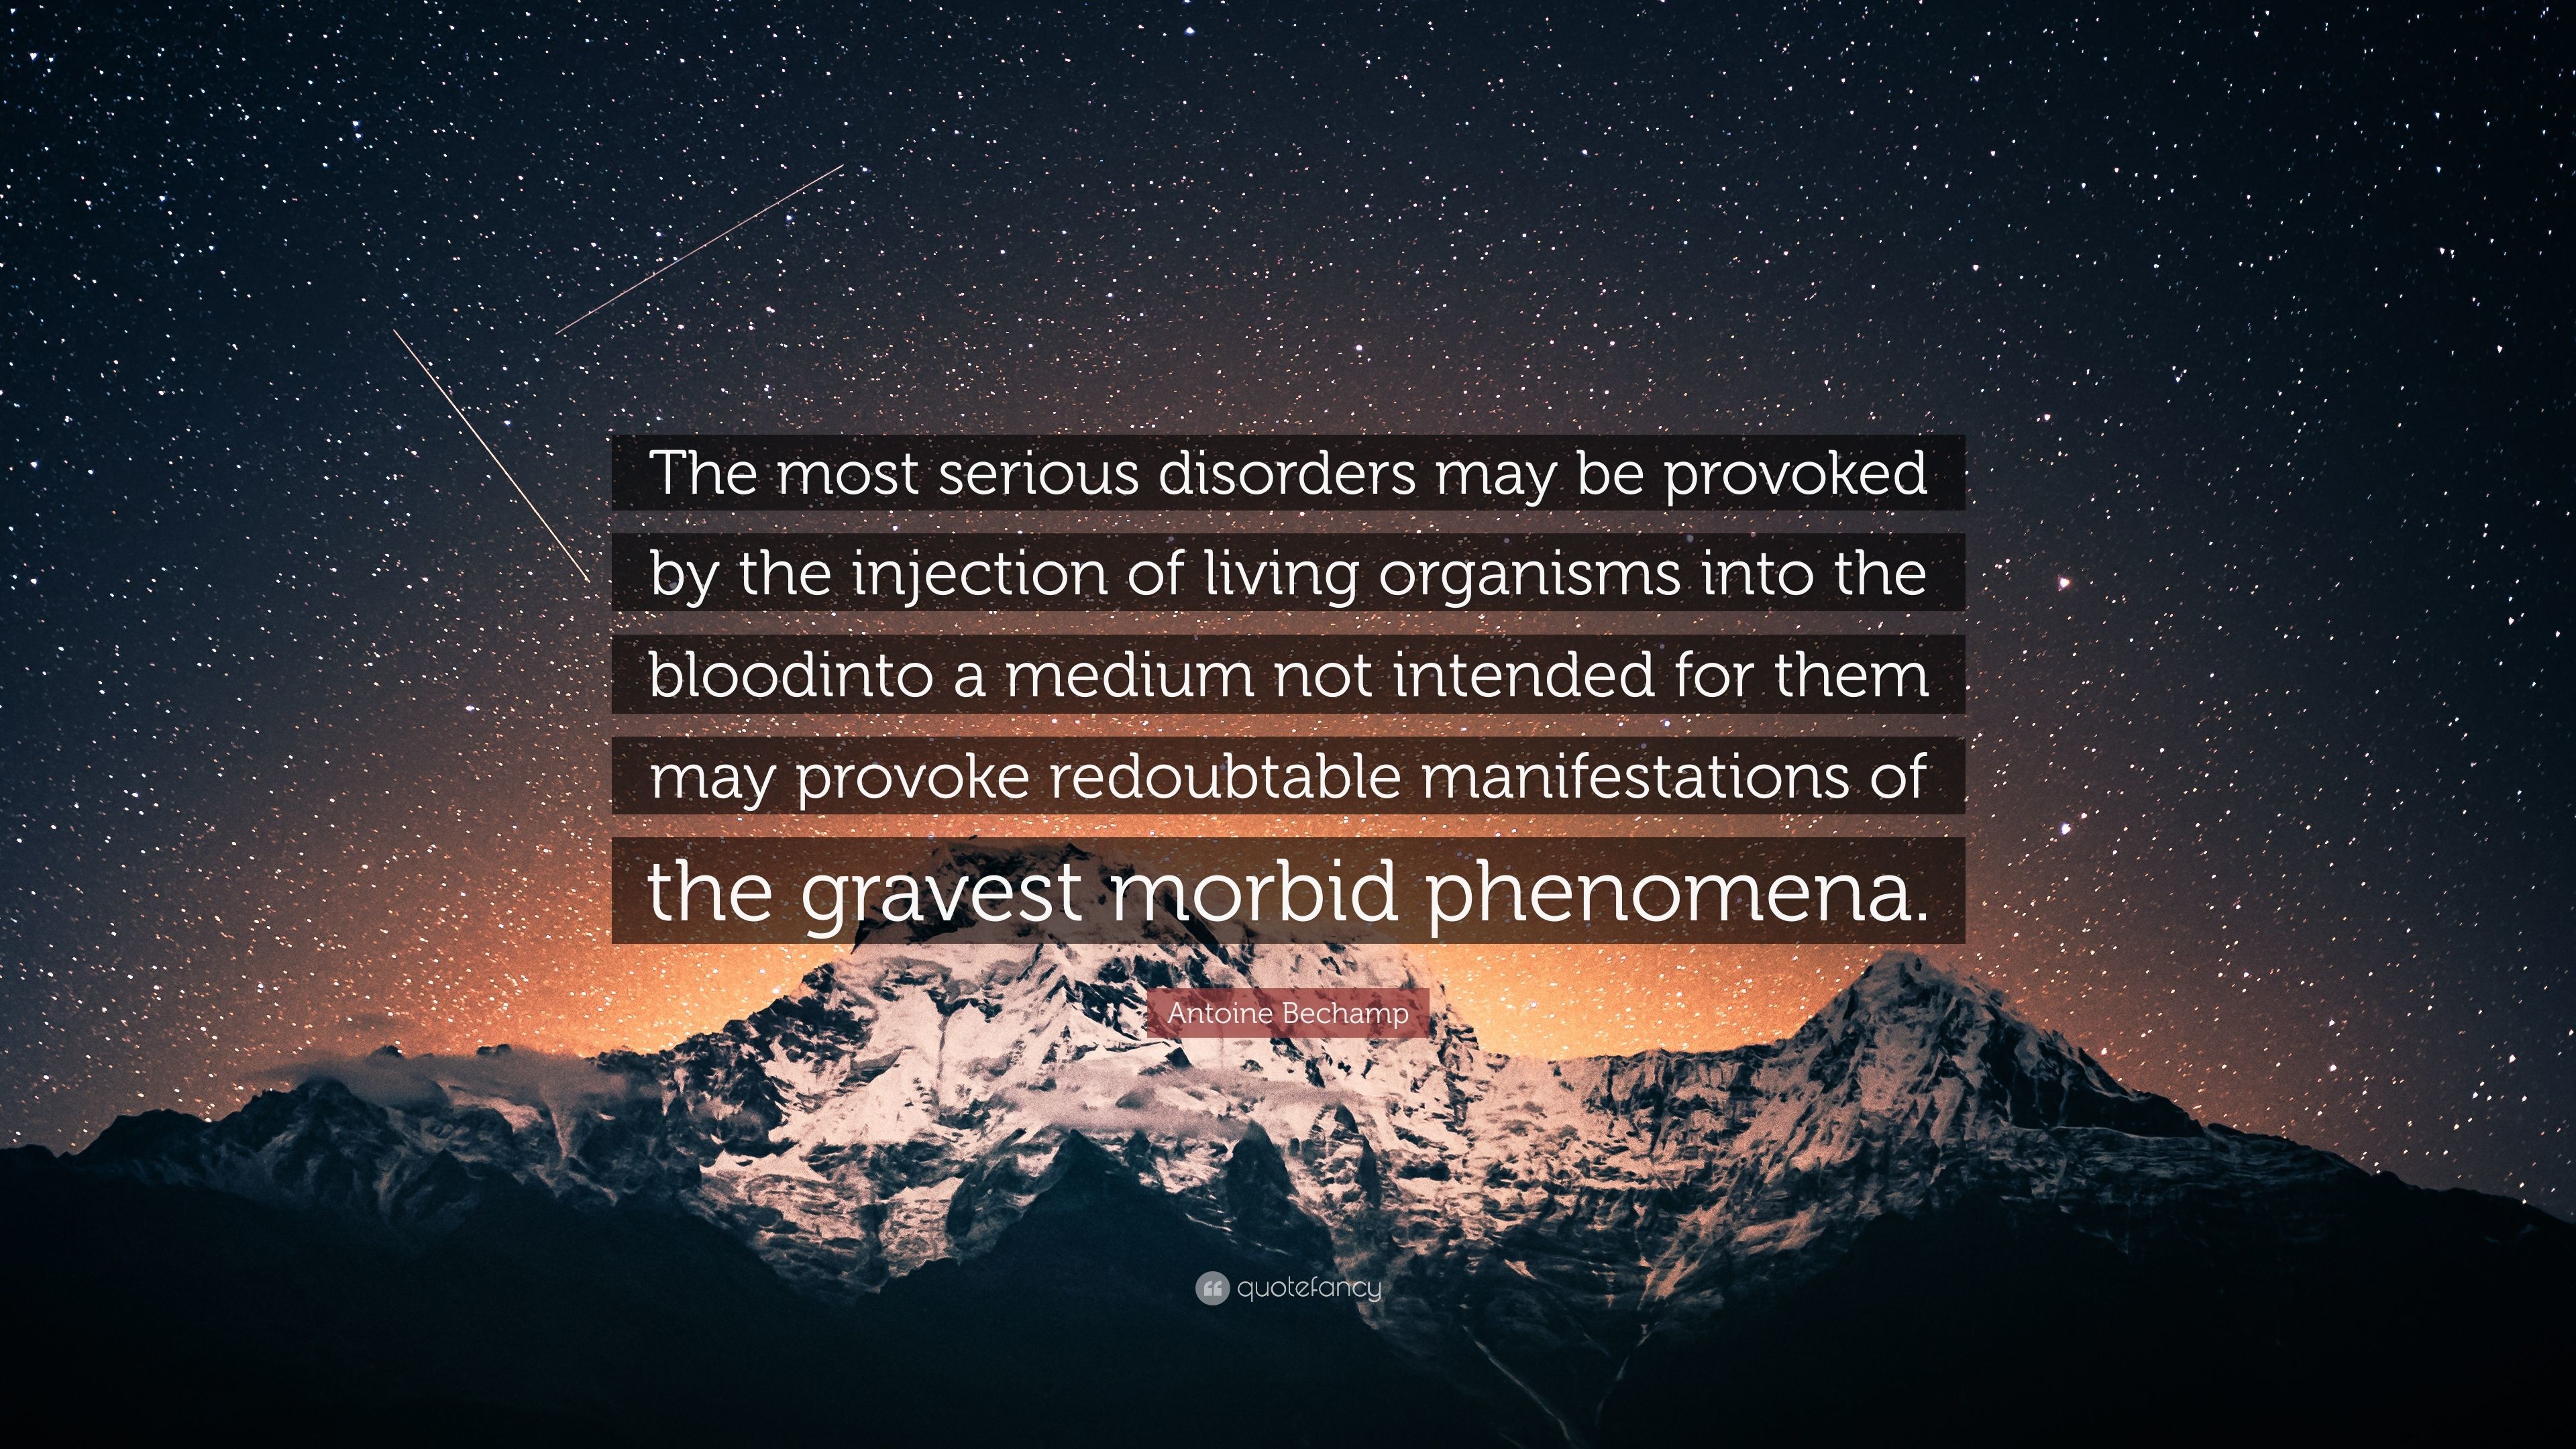 3840x2160 Antoine Bechamp Quote: “The most serious disorders may be provoked by the  injection of